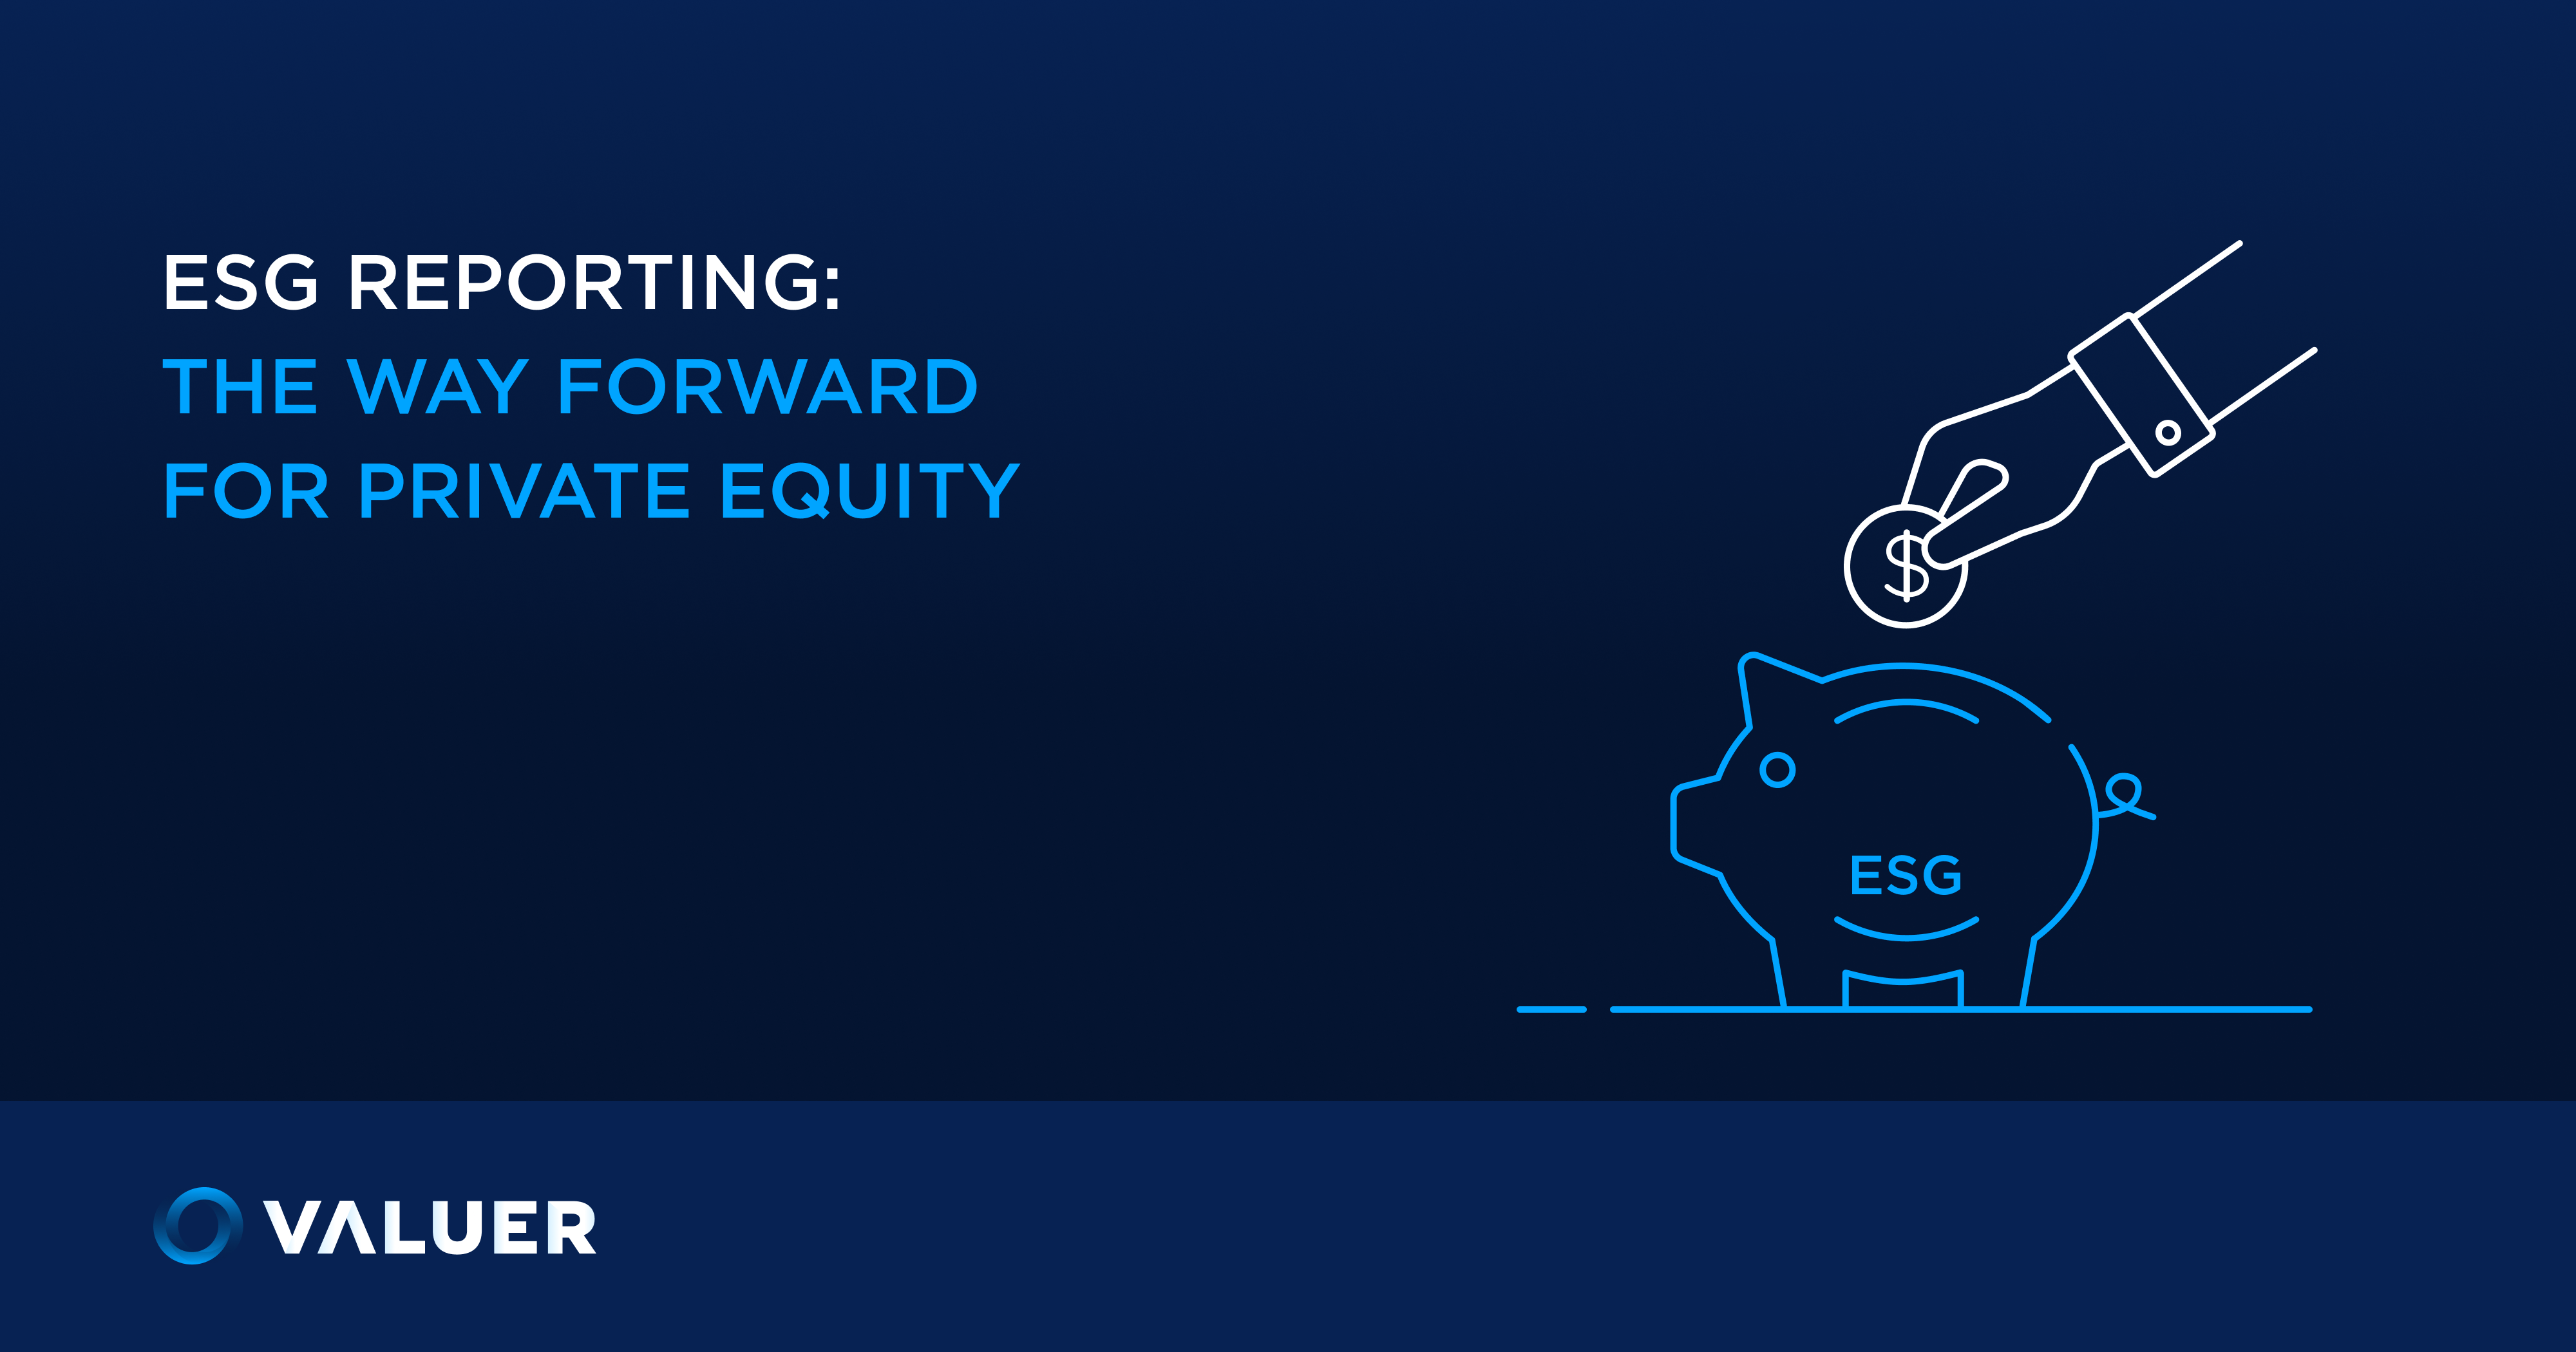 ESG Reporting: The Way Forward for Private Equity